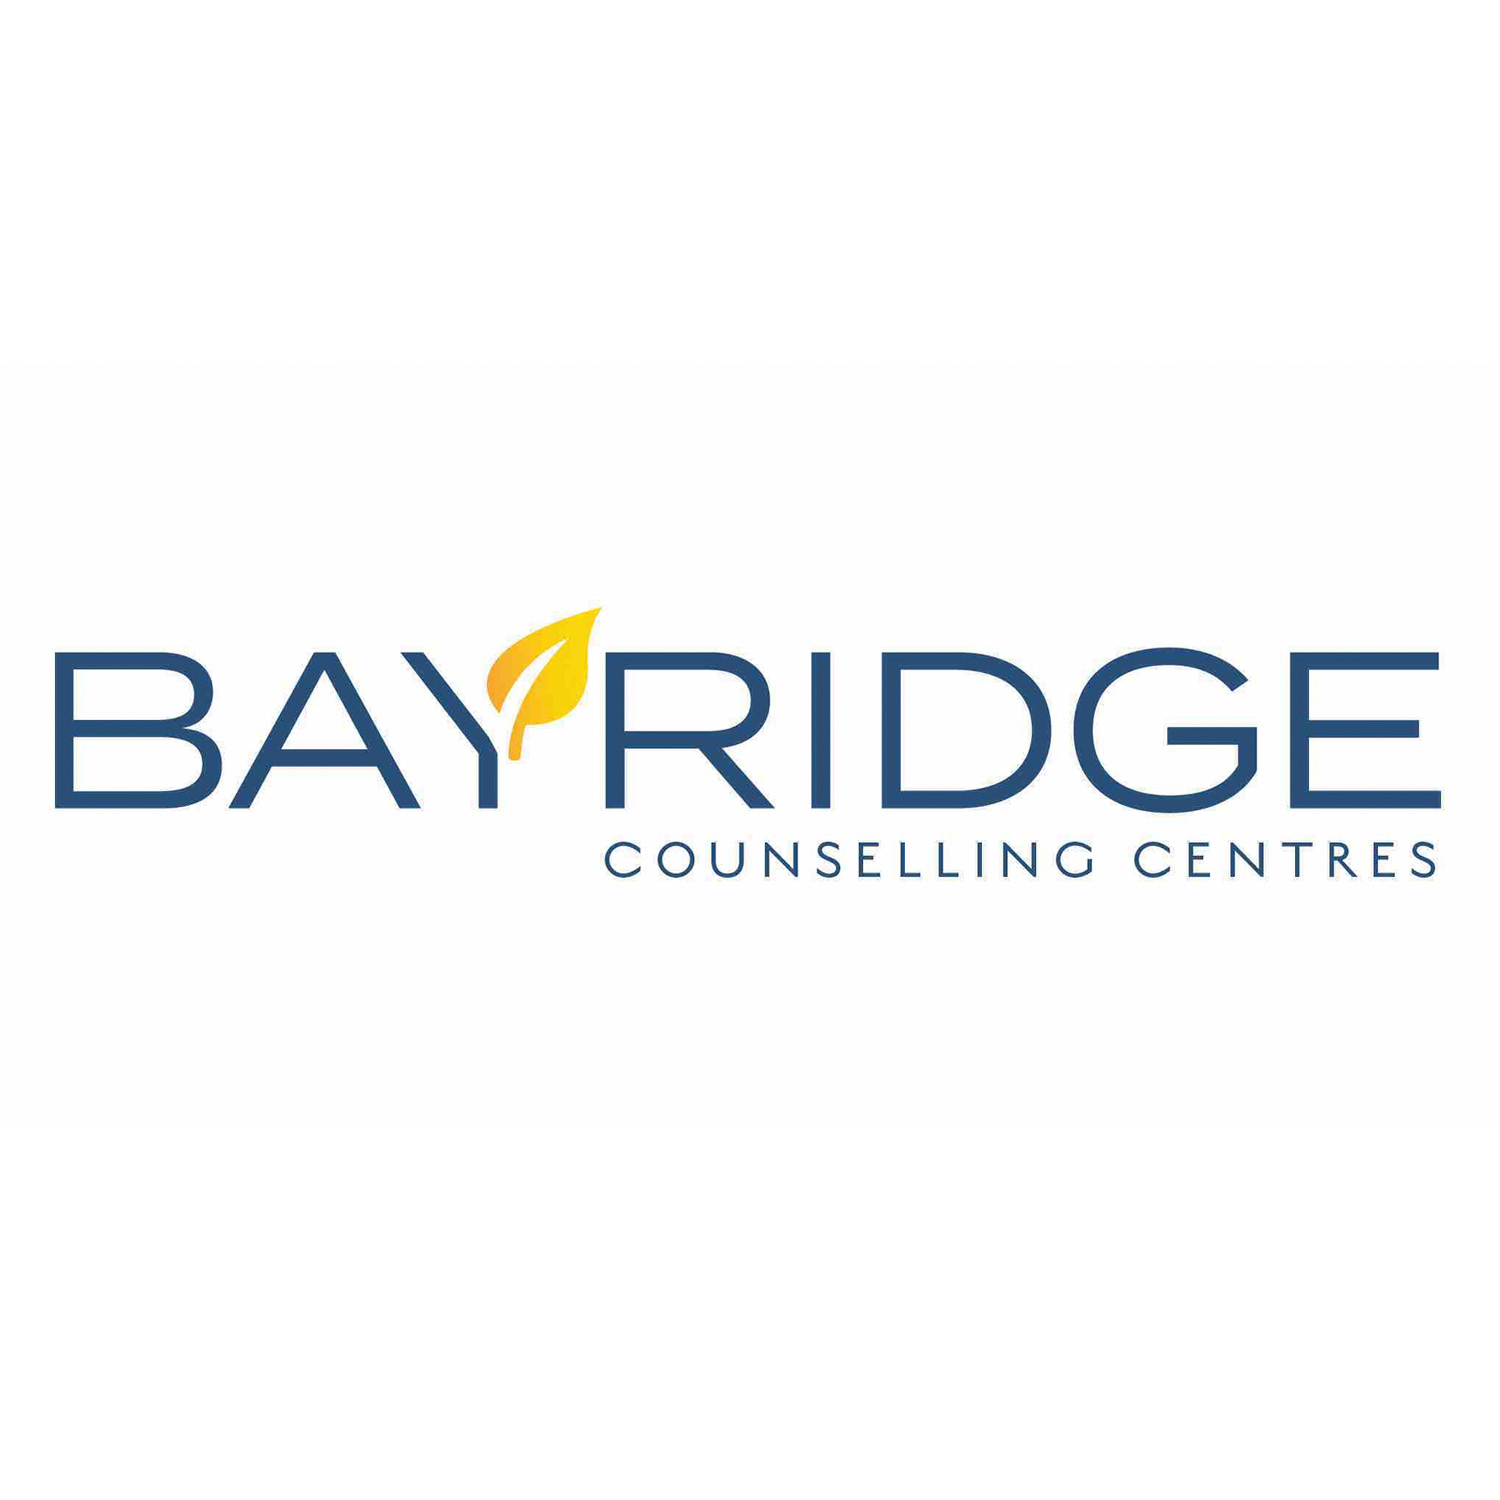 Bayridge Counselling Centre, Counselling Centre